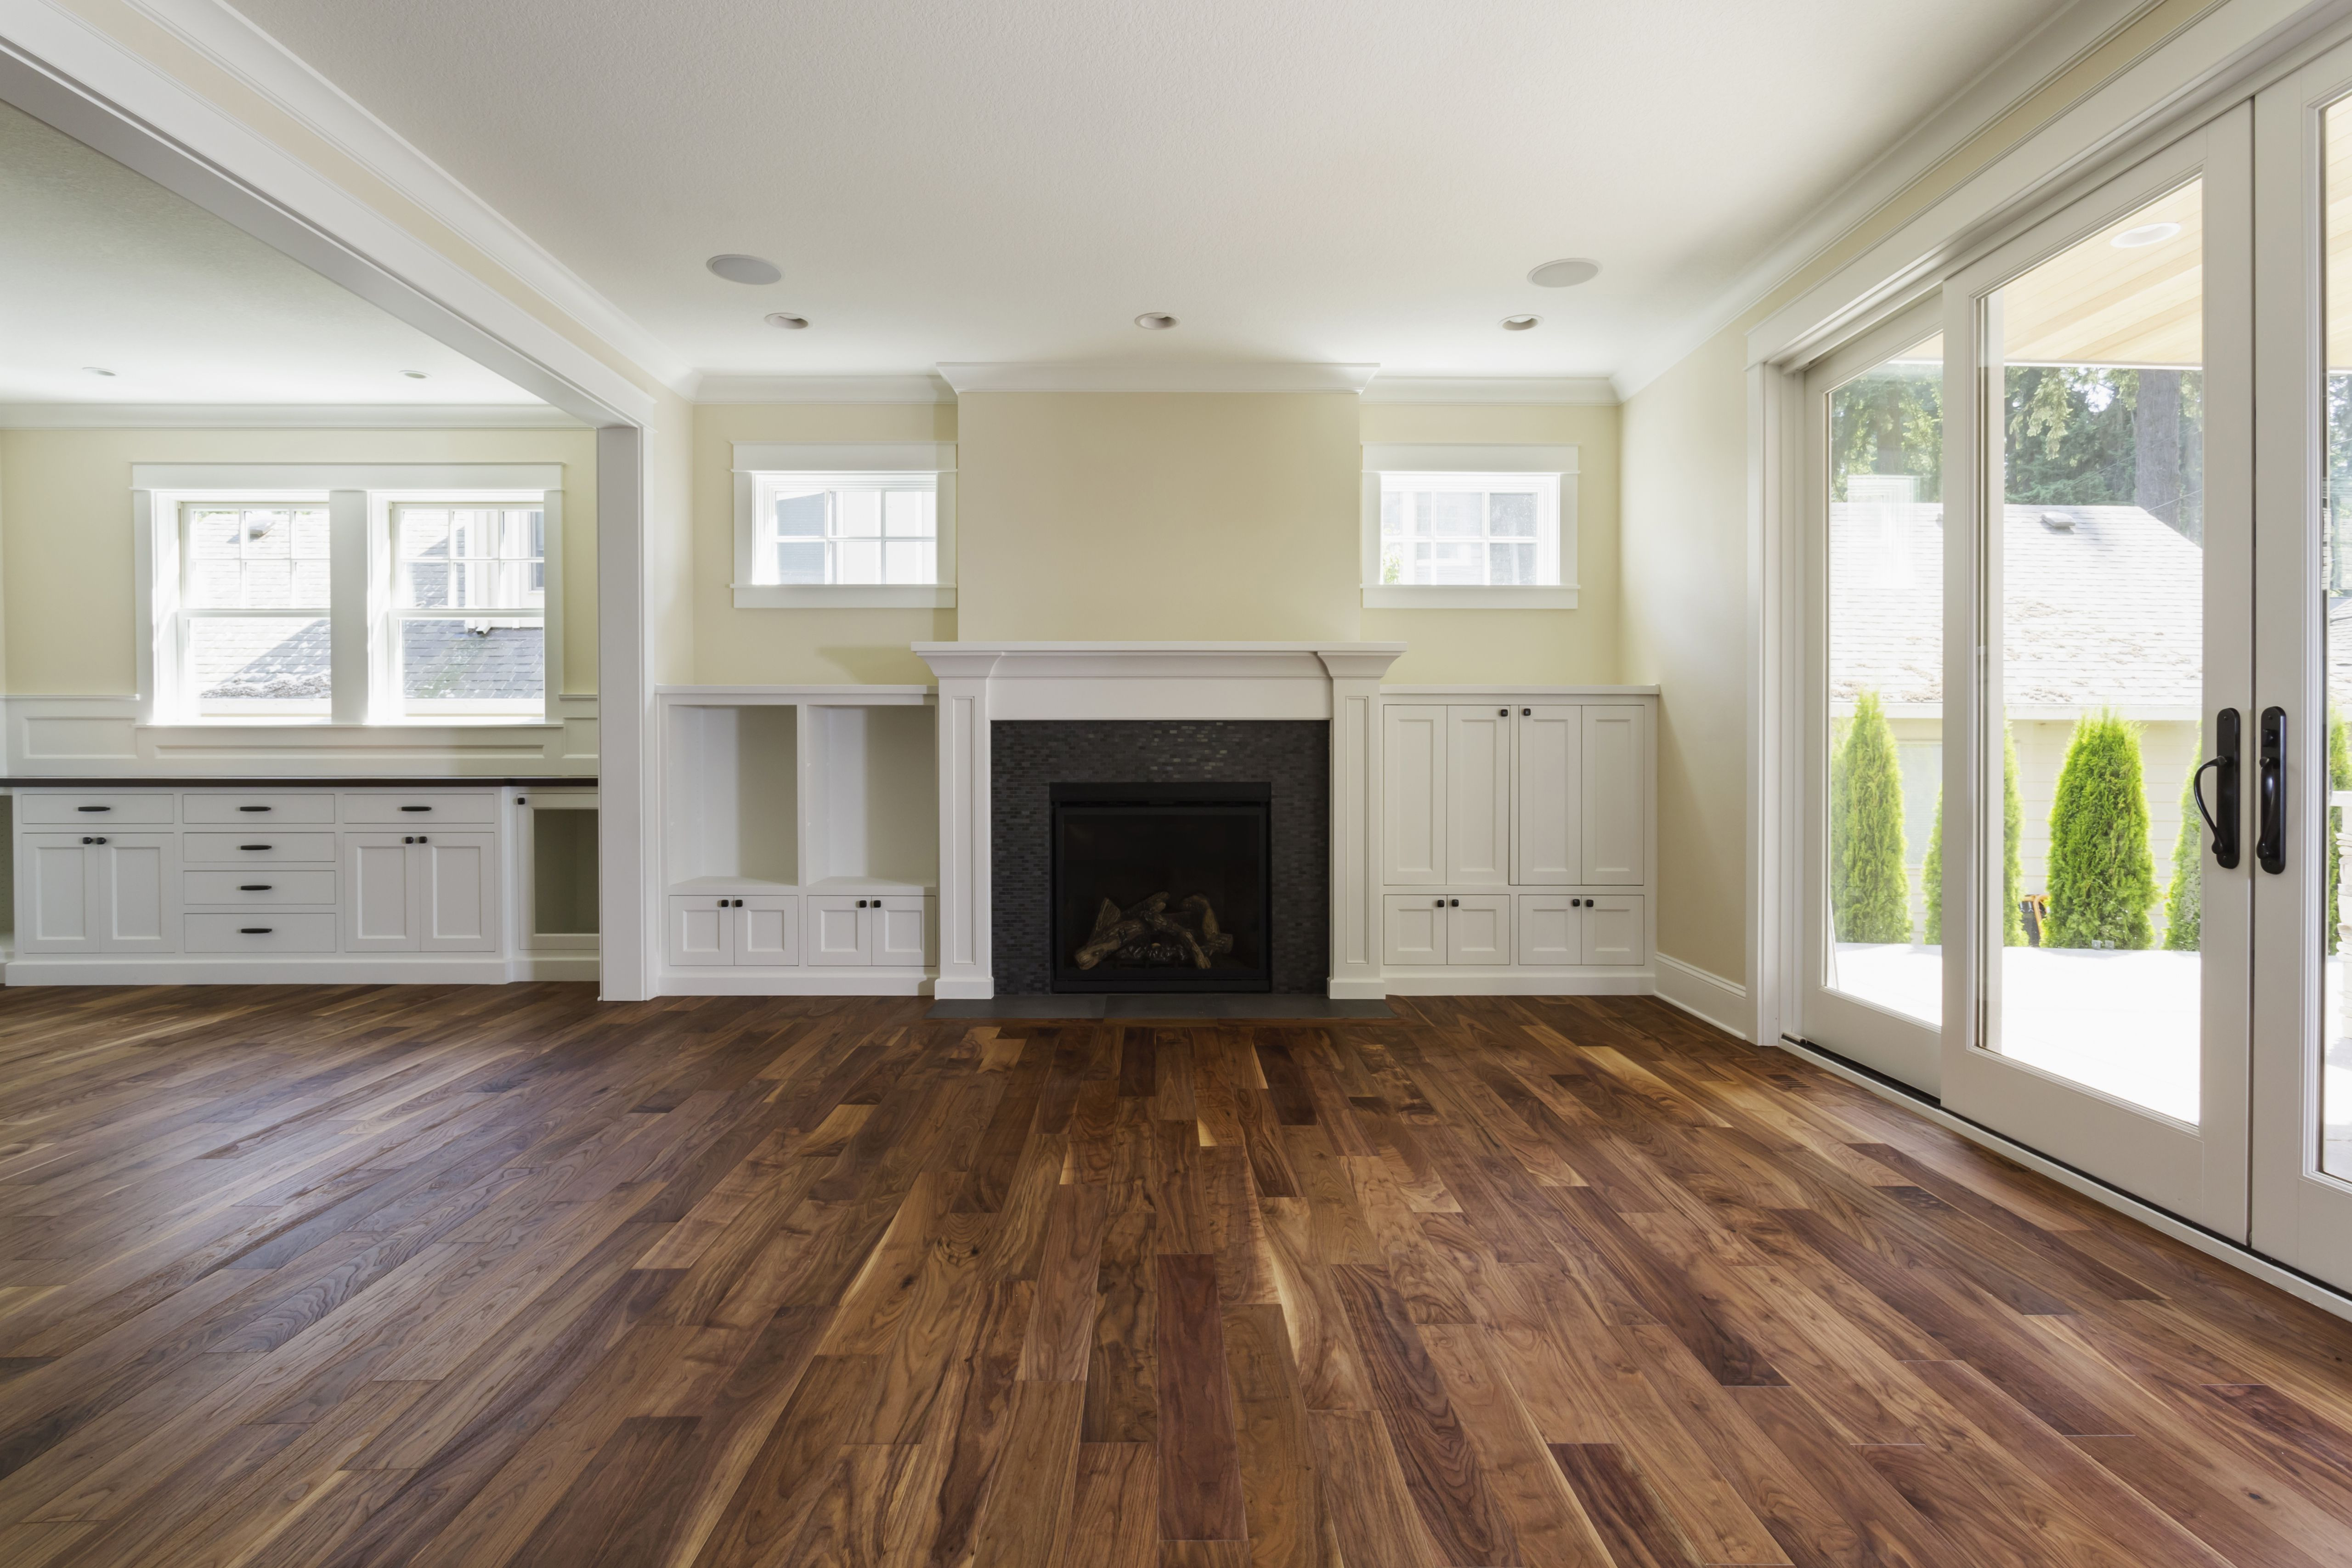 22 Fantastic Engineered Hardwood Flooring Cost Per Square Foot 2024 free download engineered hardwood flooring cost per square foot of the pros and cons of prefinished hardwood flooring regarding fireplace and built in shelves in living room 482143011 57bef8e33df78cc16e03